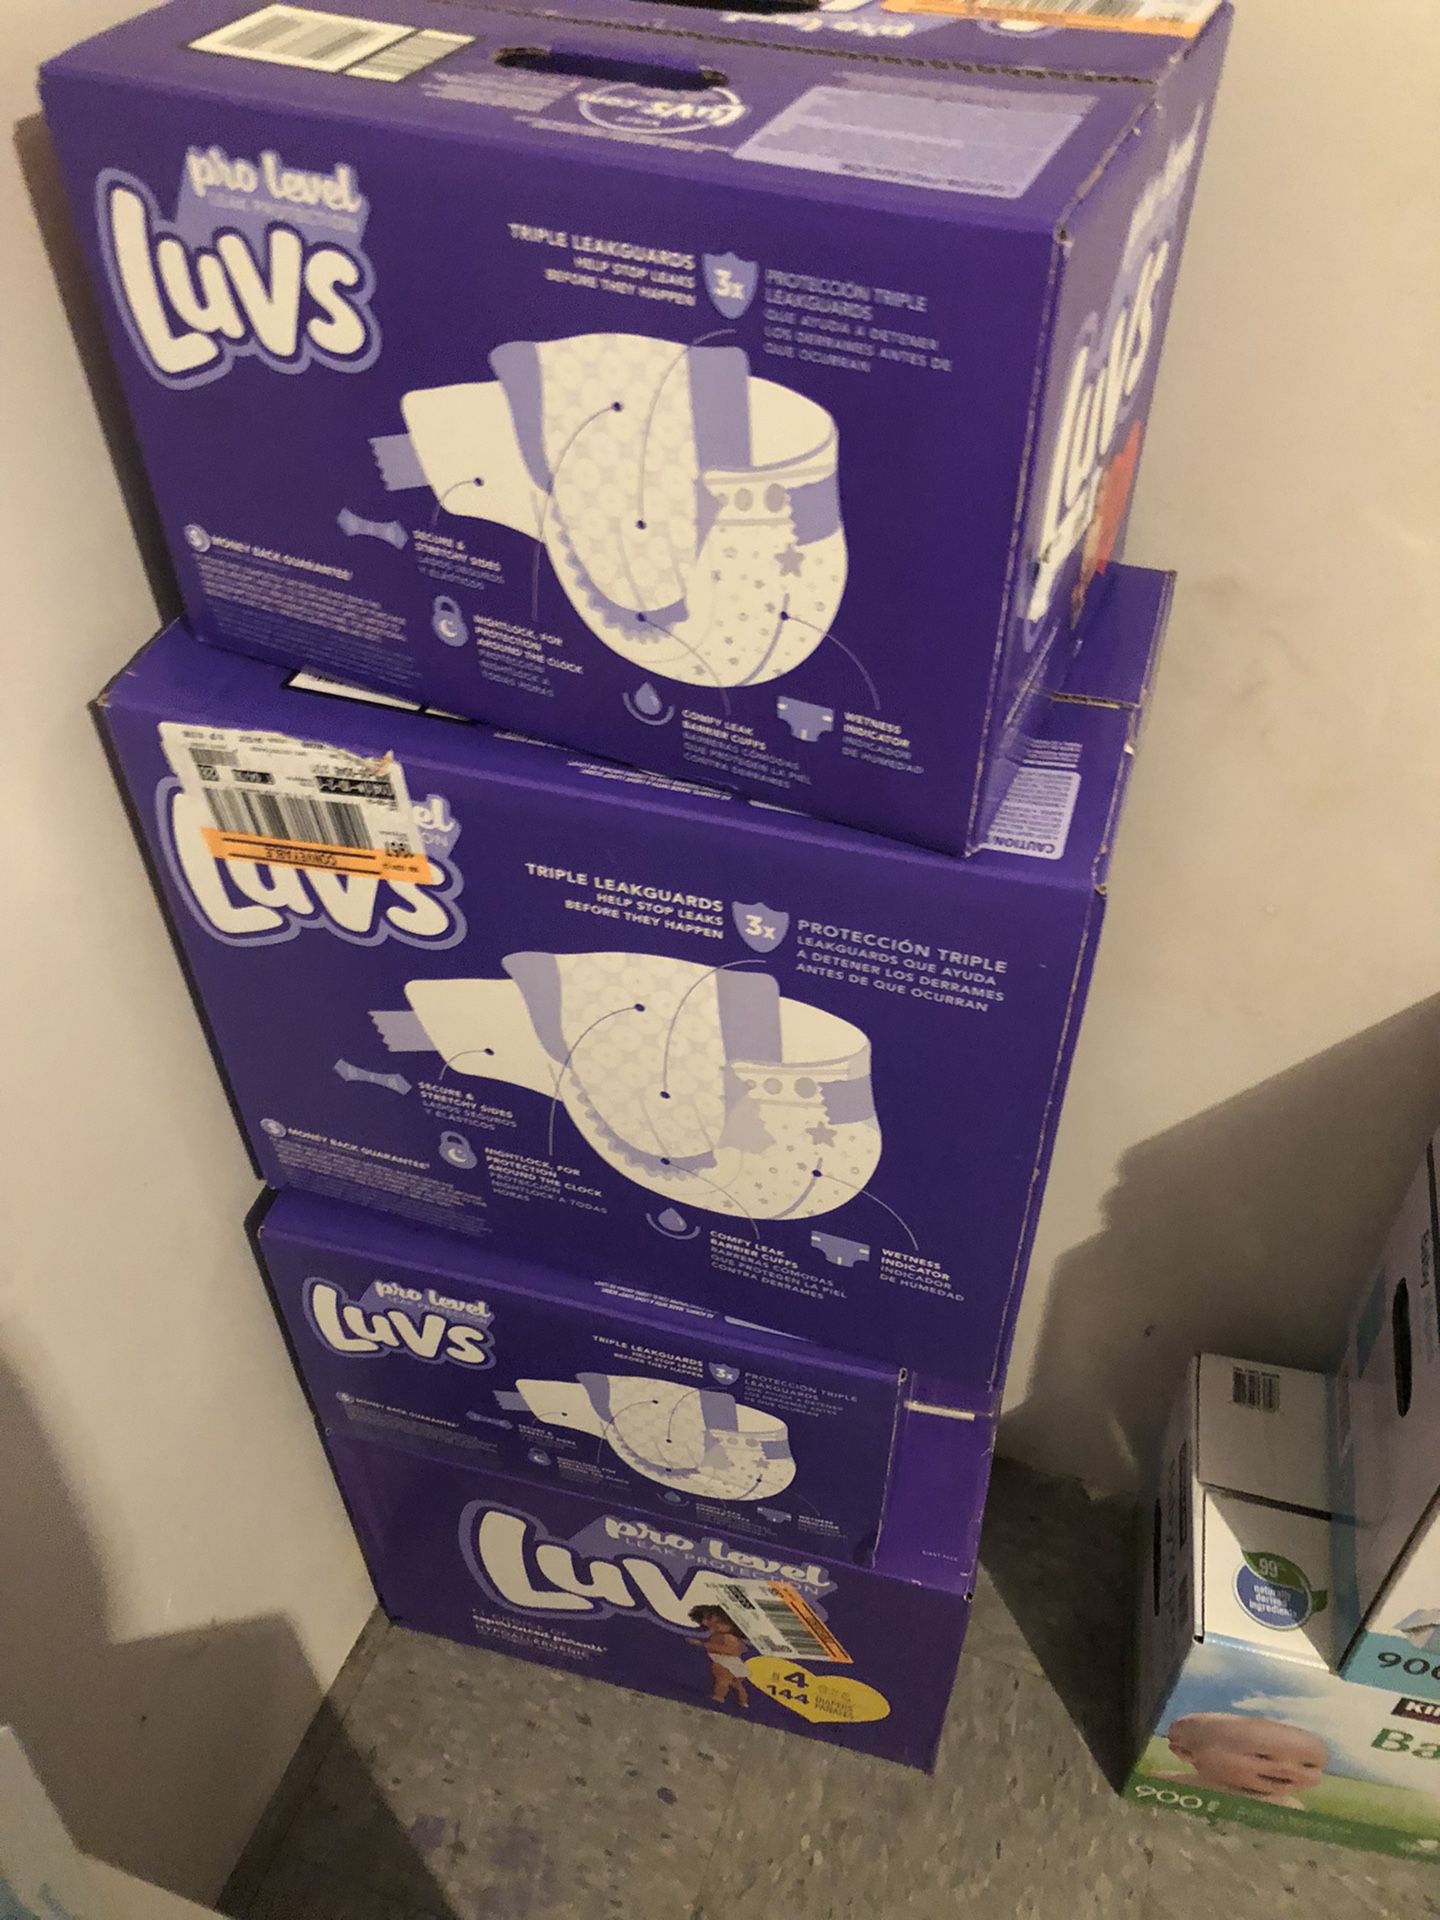 Un-open Luv diapers 